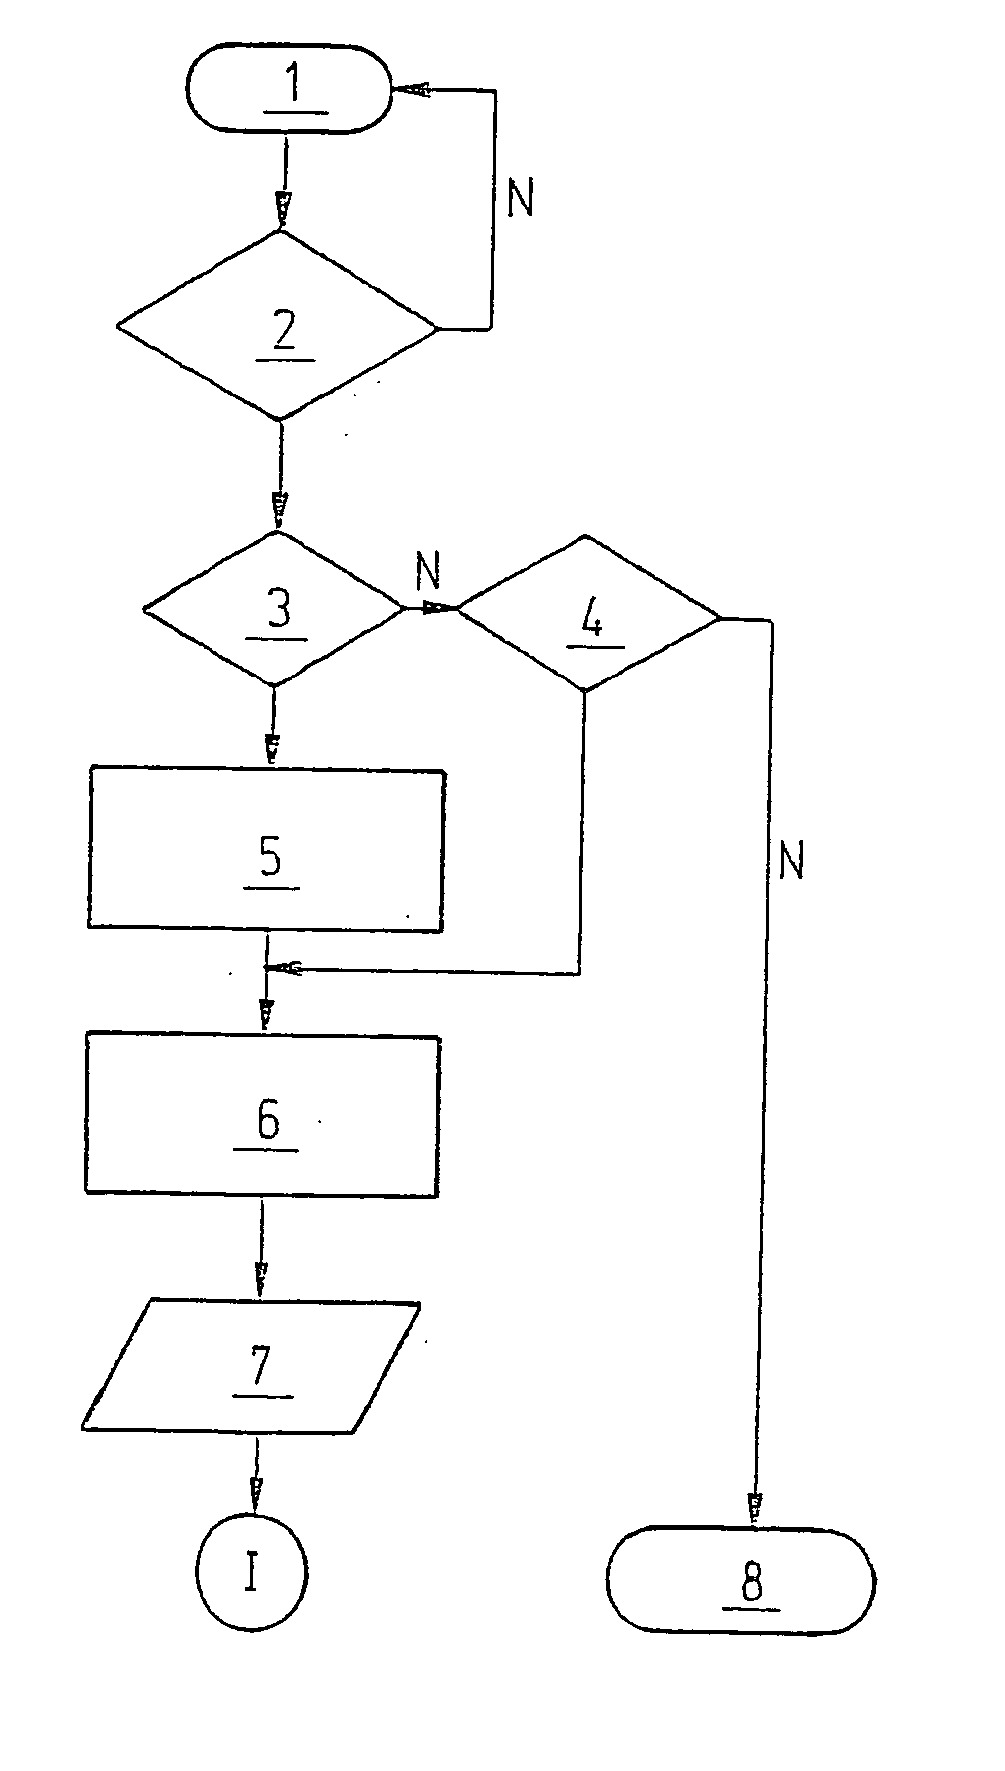 Updating routing and traffic flow data and vehicle navigation device